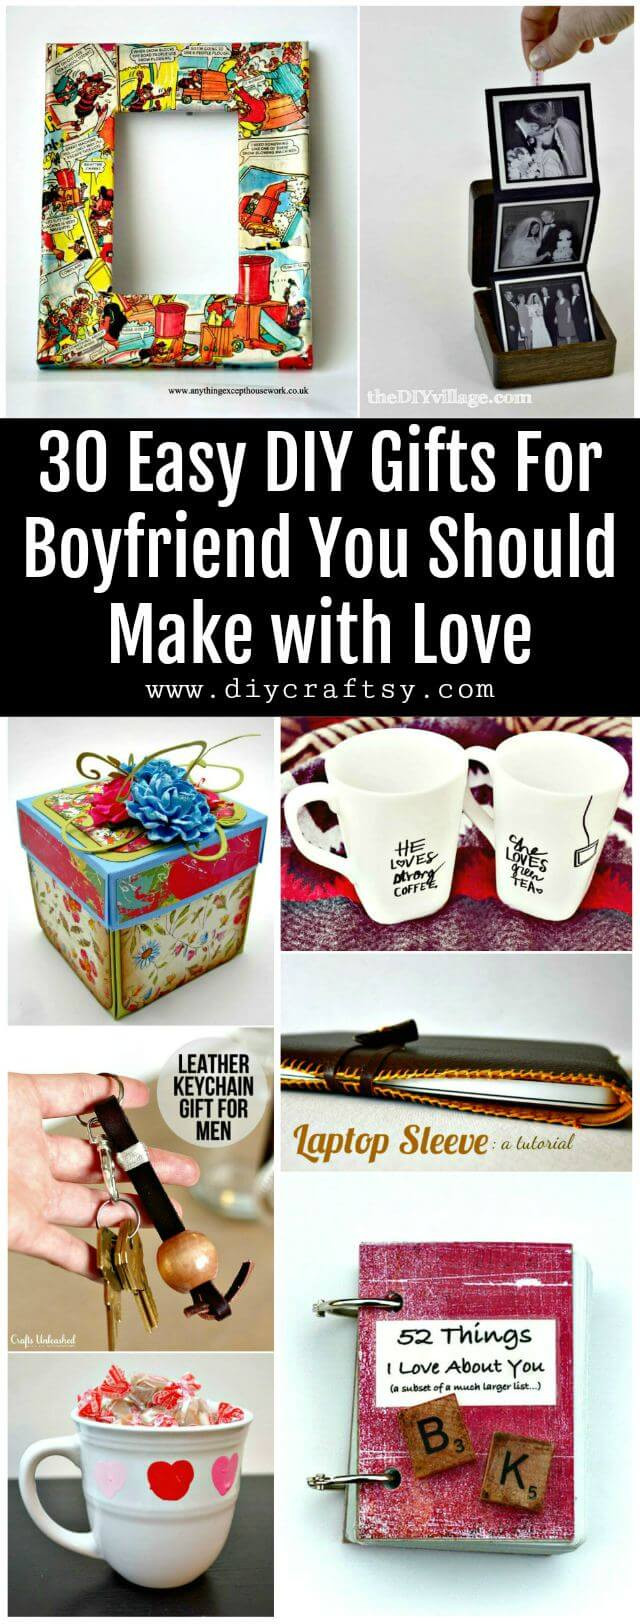 Simple Gift Ideas For Boyfriend
 30 Easy DIY Gifts For Boyfriend You Should Make with Love